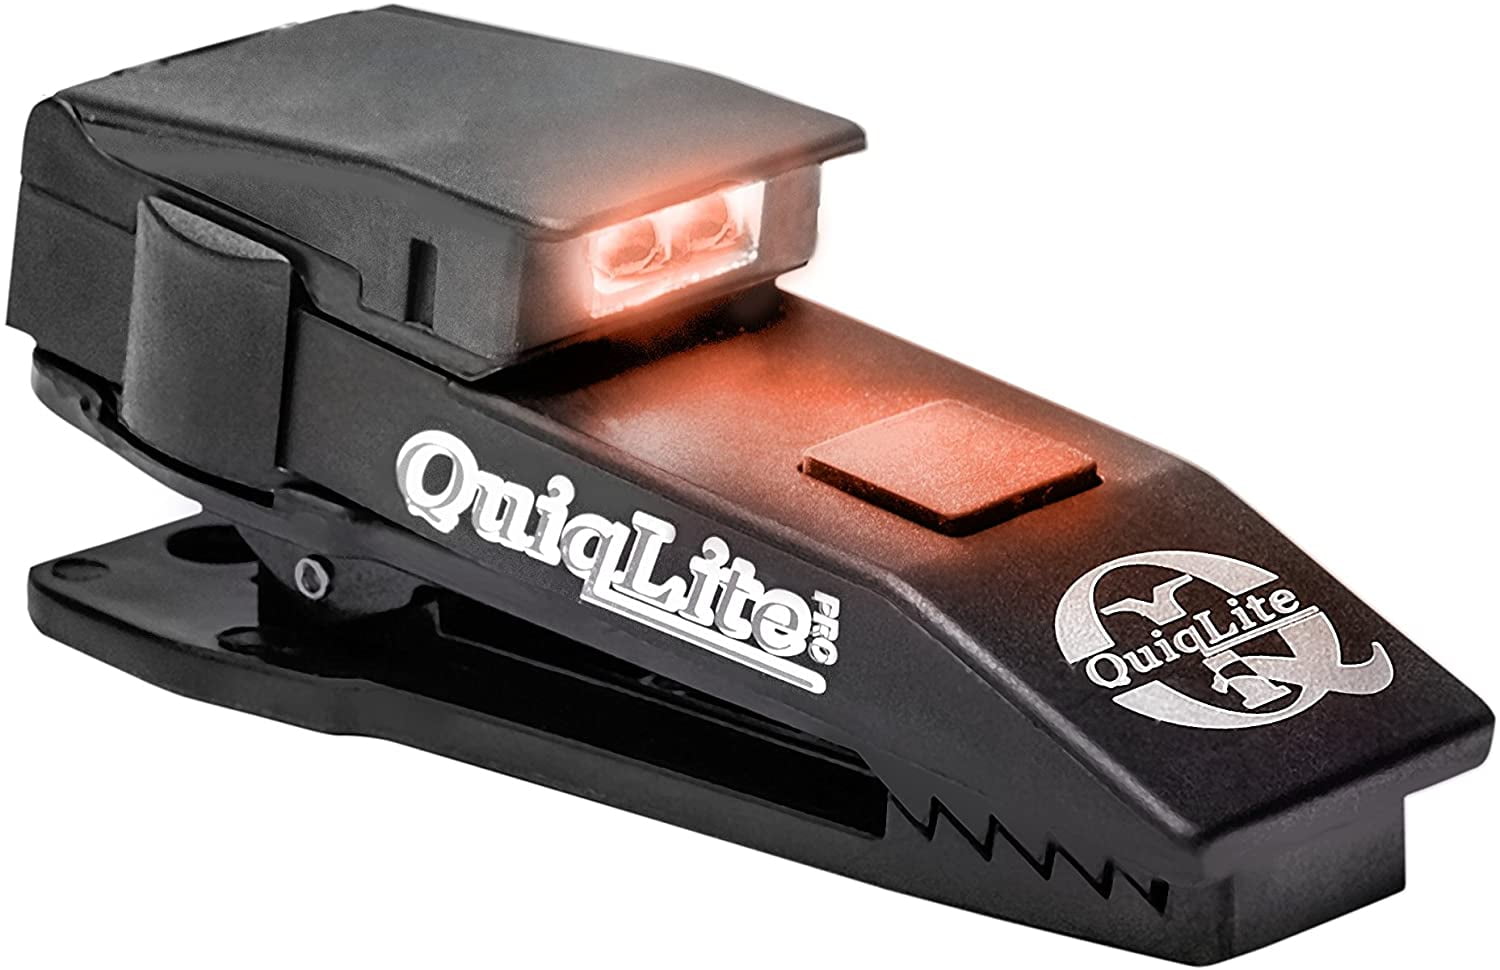 Various LED Color Options QuiqLitePro Hands Free Pocket Concealable Flashlight